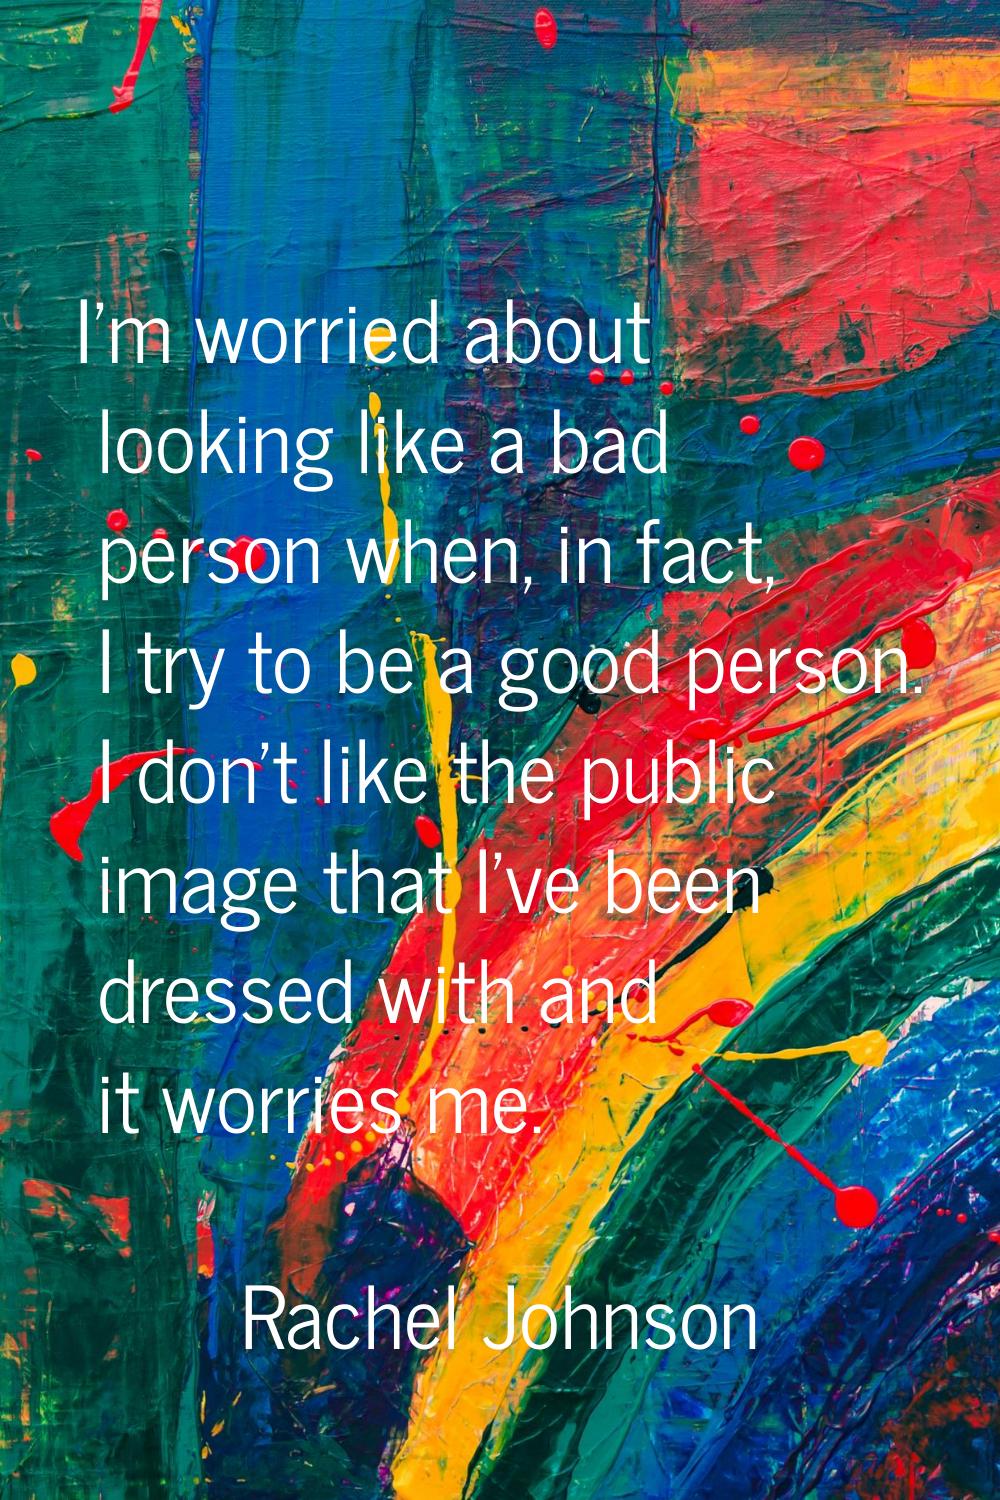 I'm worried about looking like a bad person when, in fact, I try to be a good person. I don't like 